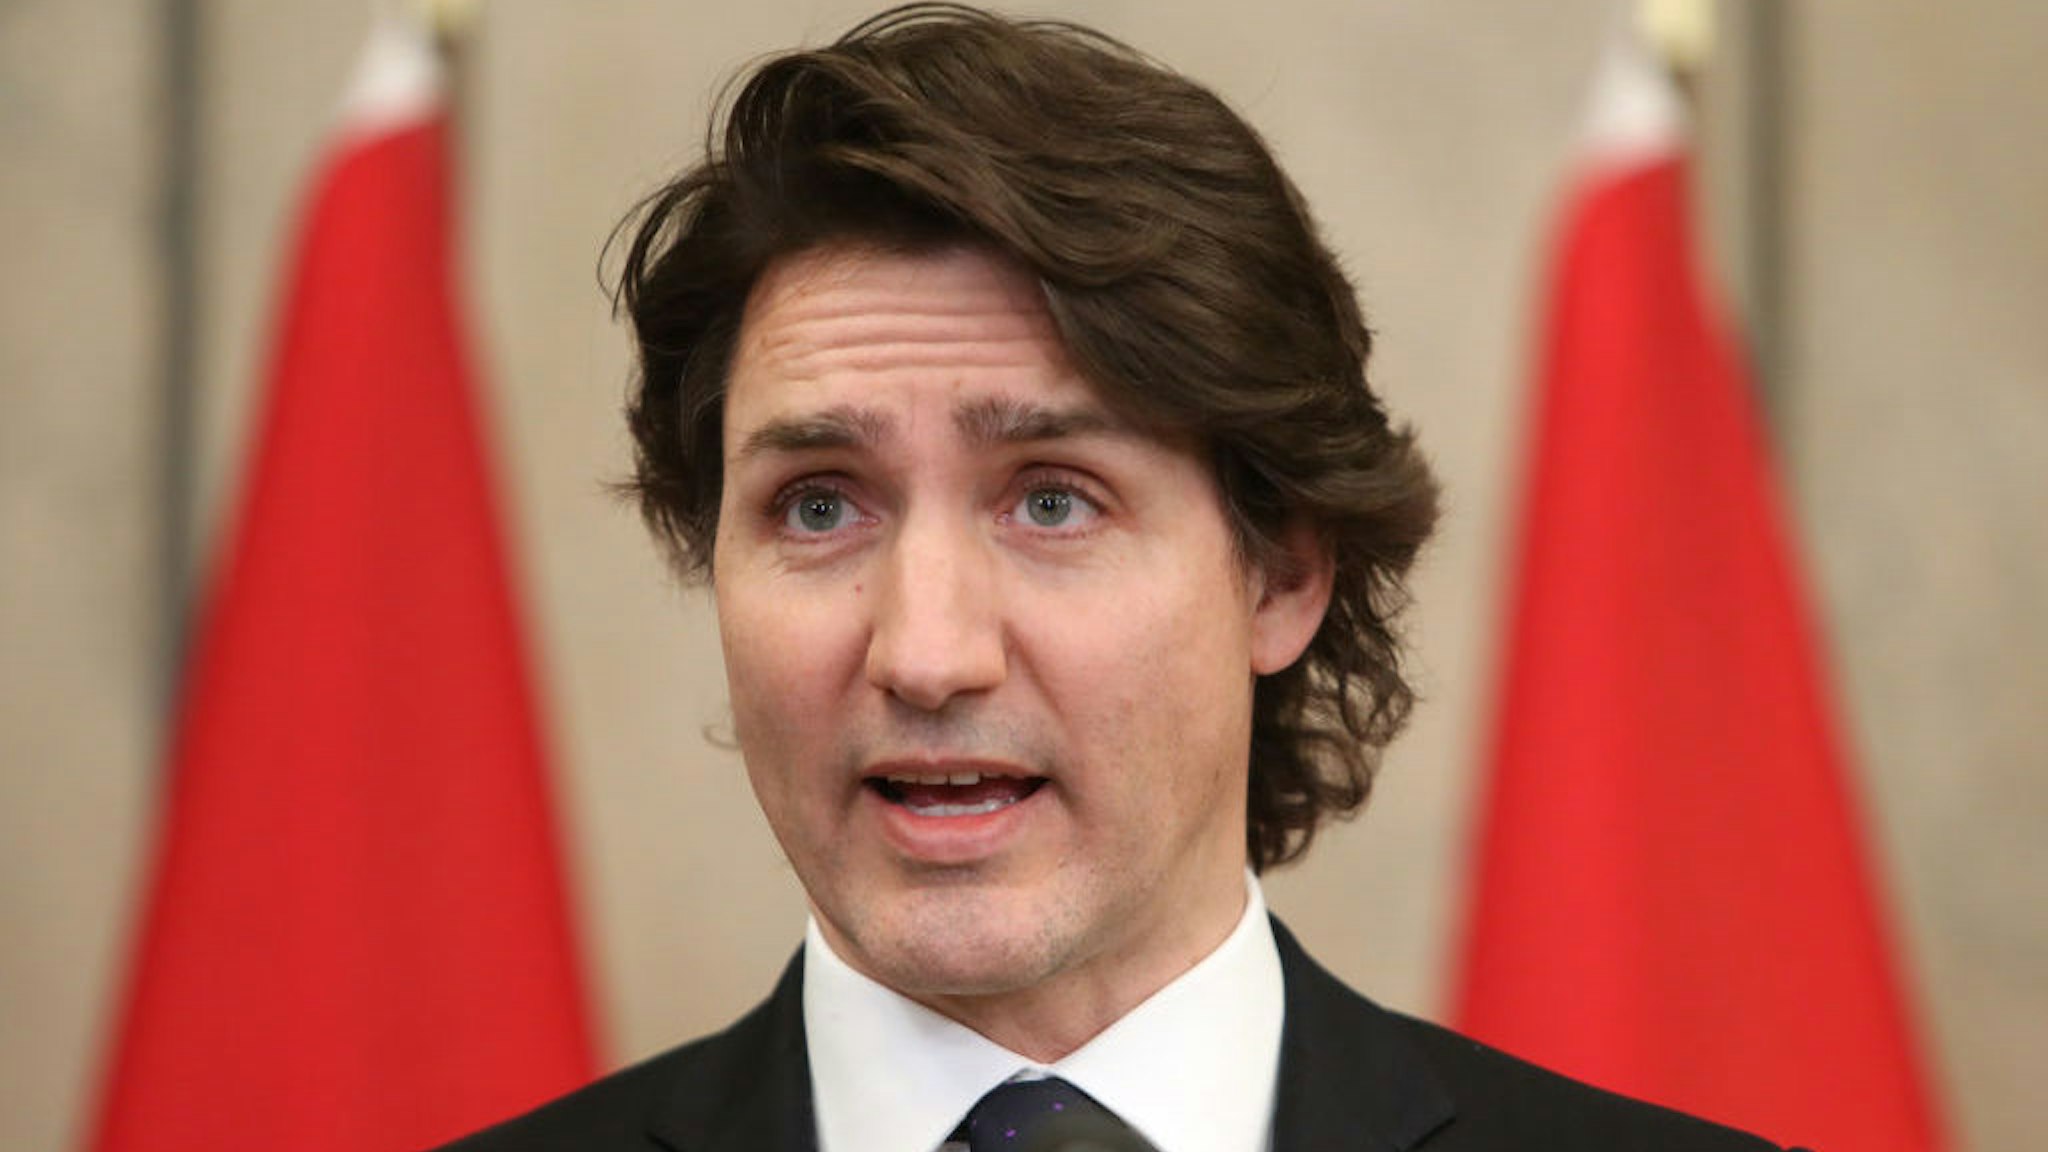 Justin Trudeau, Canada's prime minister, speaks during a news conference on Parliament Hill in Ottawa, Ontario, Canada, on Friday, Feb. 11, 2022. Trudeau warned that demonstrators will face "real consequences" if they continue blockades in Ottawa and at the U.S. border, while using more conciliatory language in an attempt to help defuse the situation. Photographer: David Kawai/Bloomberg